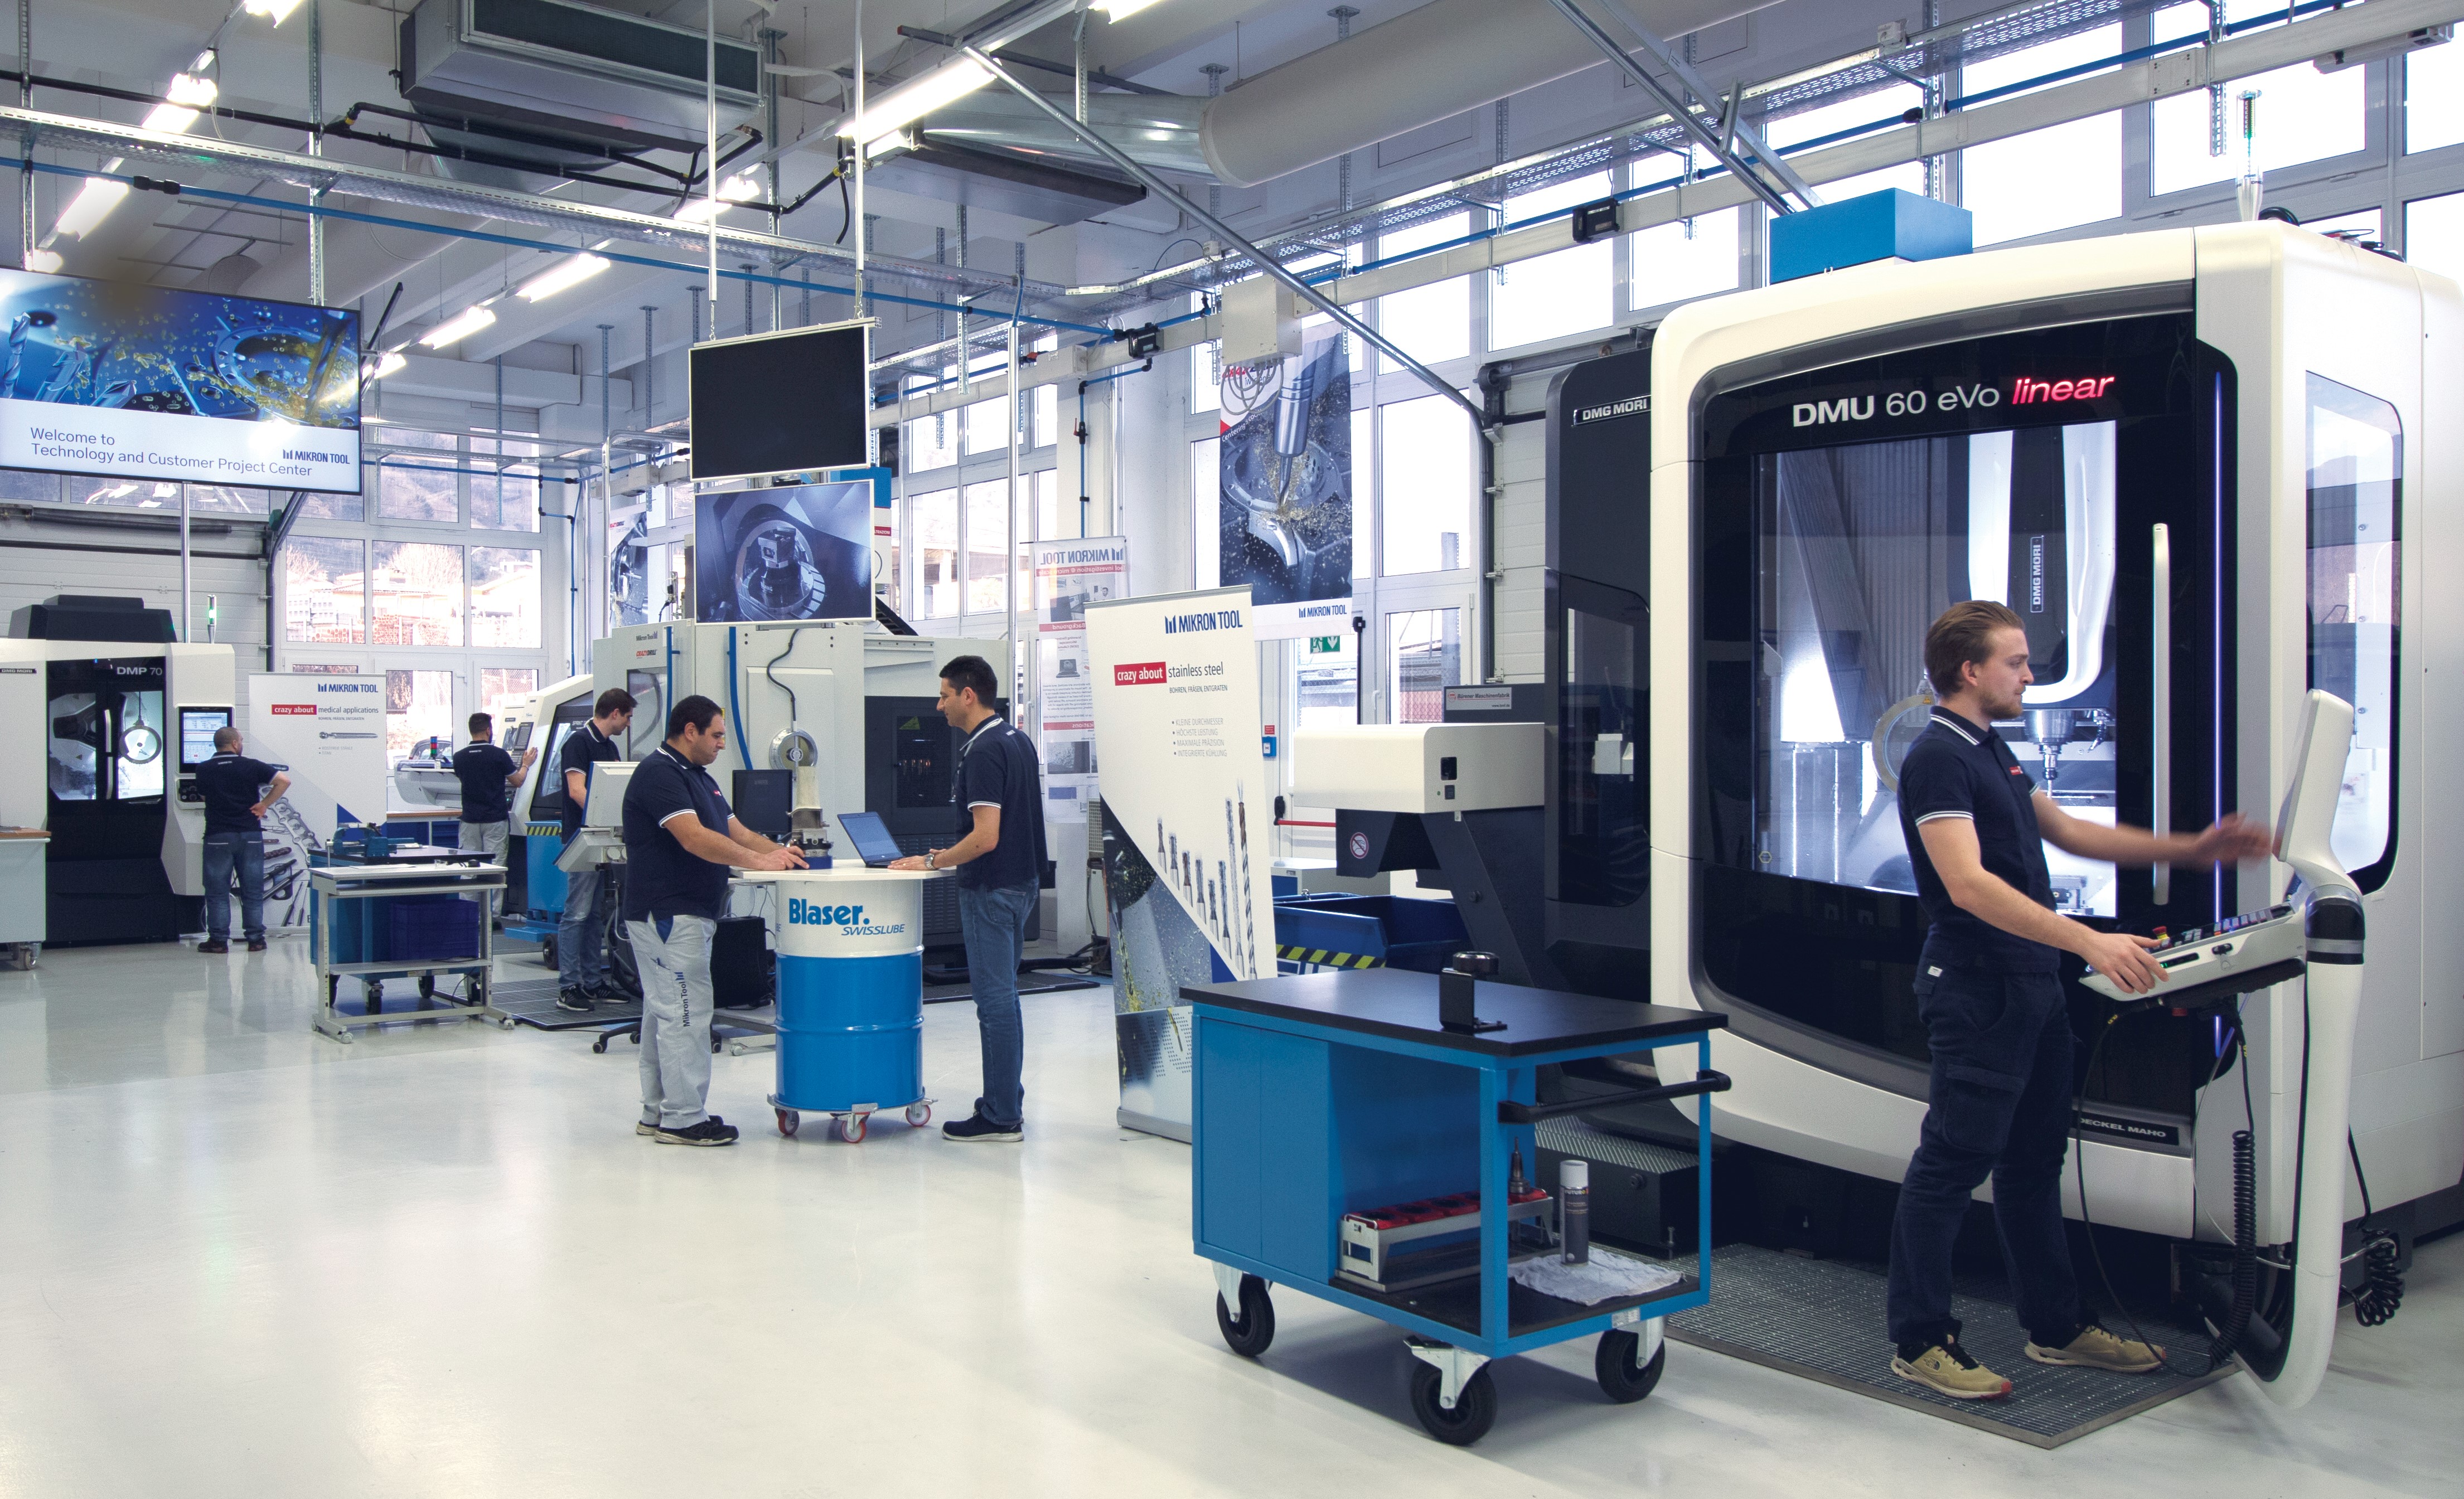 The Mikron Tool Technology Center in Agno is equipped with 5-axis machining centers, vertical high-speed machining centers, 8-axis automatic lathes and a recently arrived compact 6-side turn & mill complete machining station.